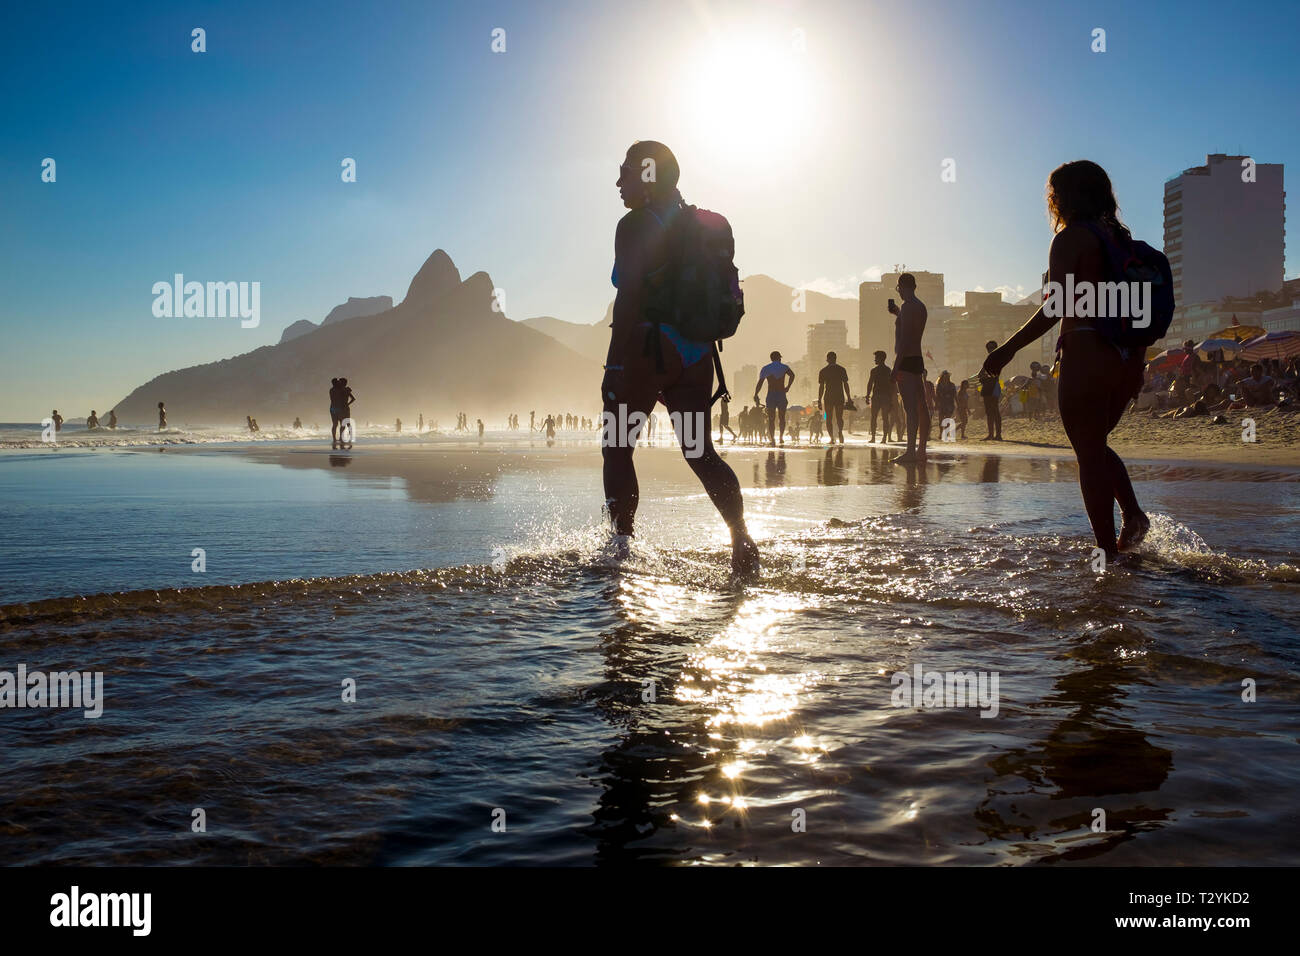 RIO DE JANEIRO - FEBRUARY, 2018: Silhouettes of beachgoers stand in the waves on Ipanema Beach, where scenic sunsets belie a violent crime epidemic. Stock Photo